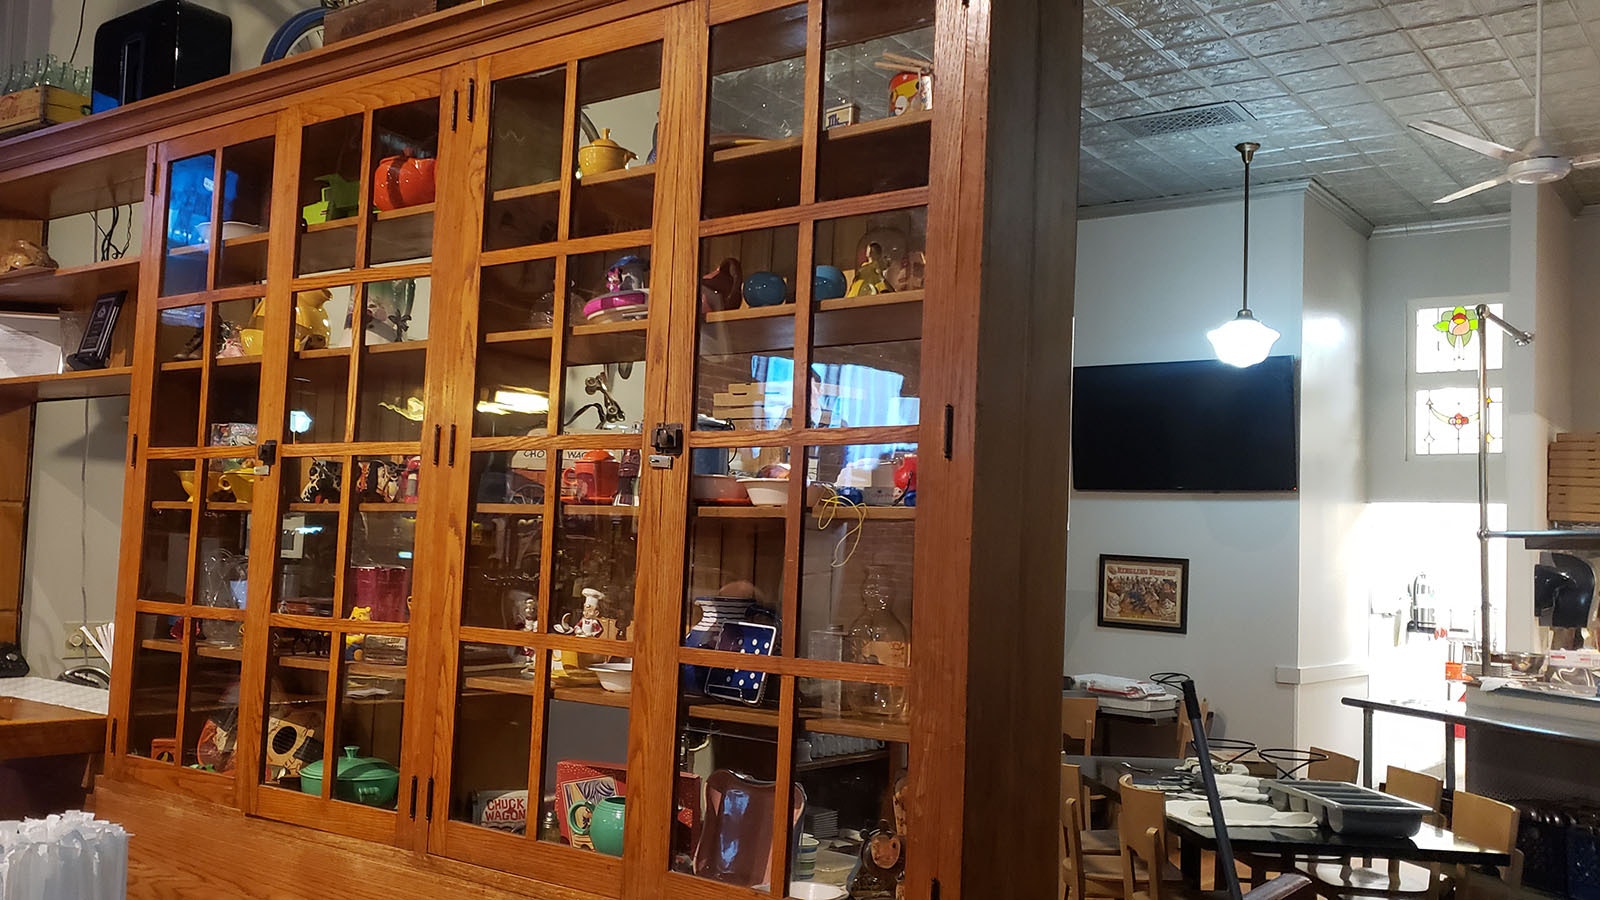 Pie Zanos co-owner Renée Tiller has placed many of her dad's antiques on display at the restaurant.